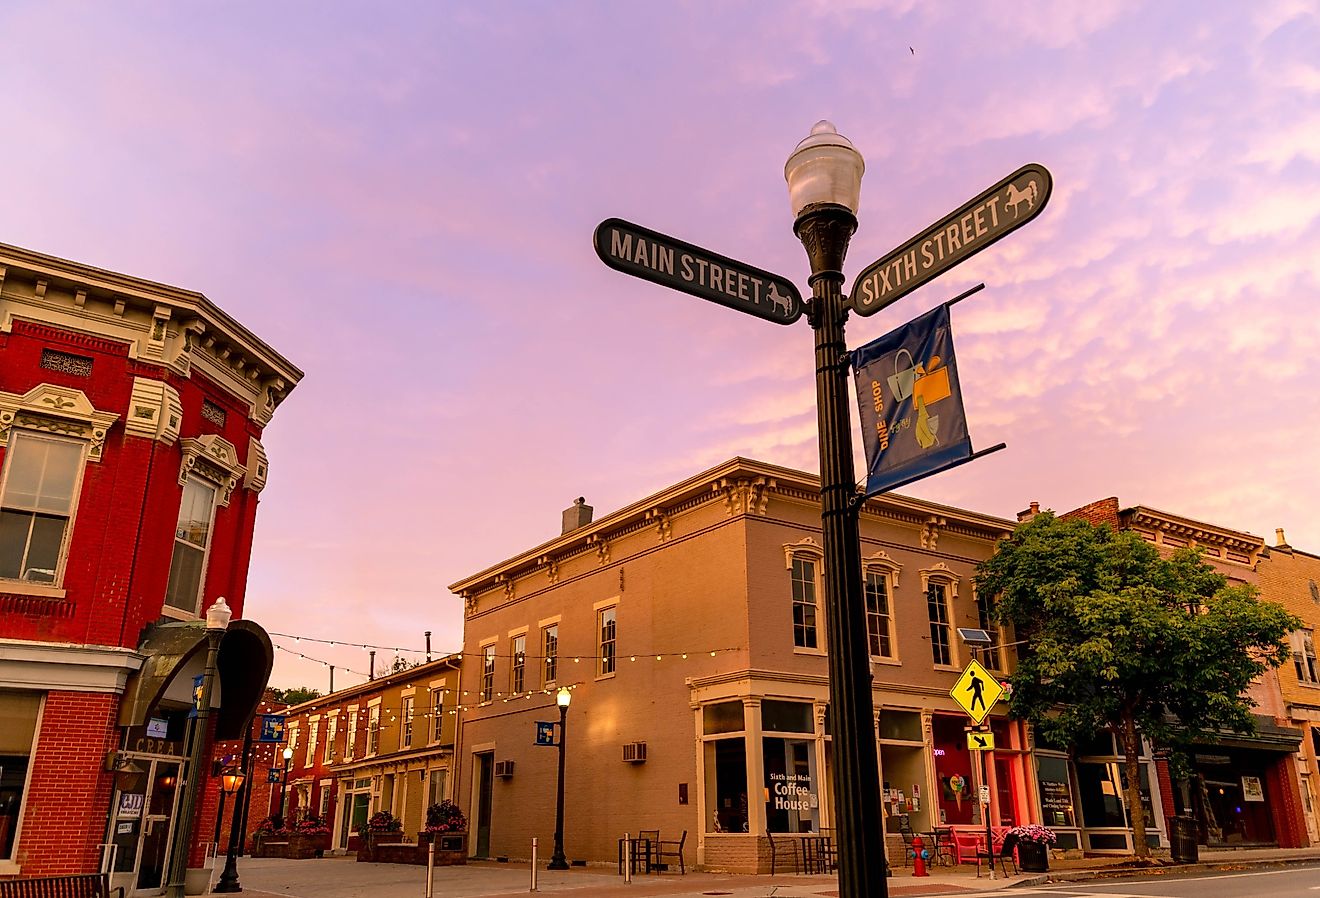 The City of Shelbyville, Kentucky redesign of Sixth Street is in the heart of the Historic District. Image credit Blue Meta via Shutterstock